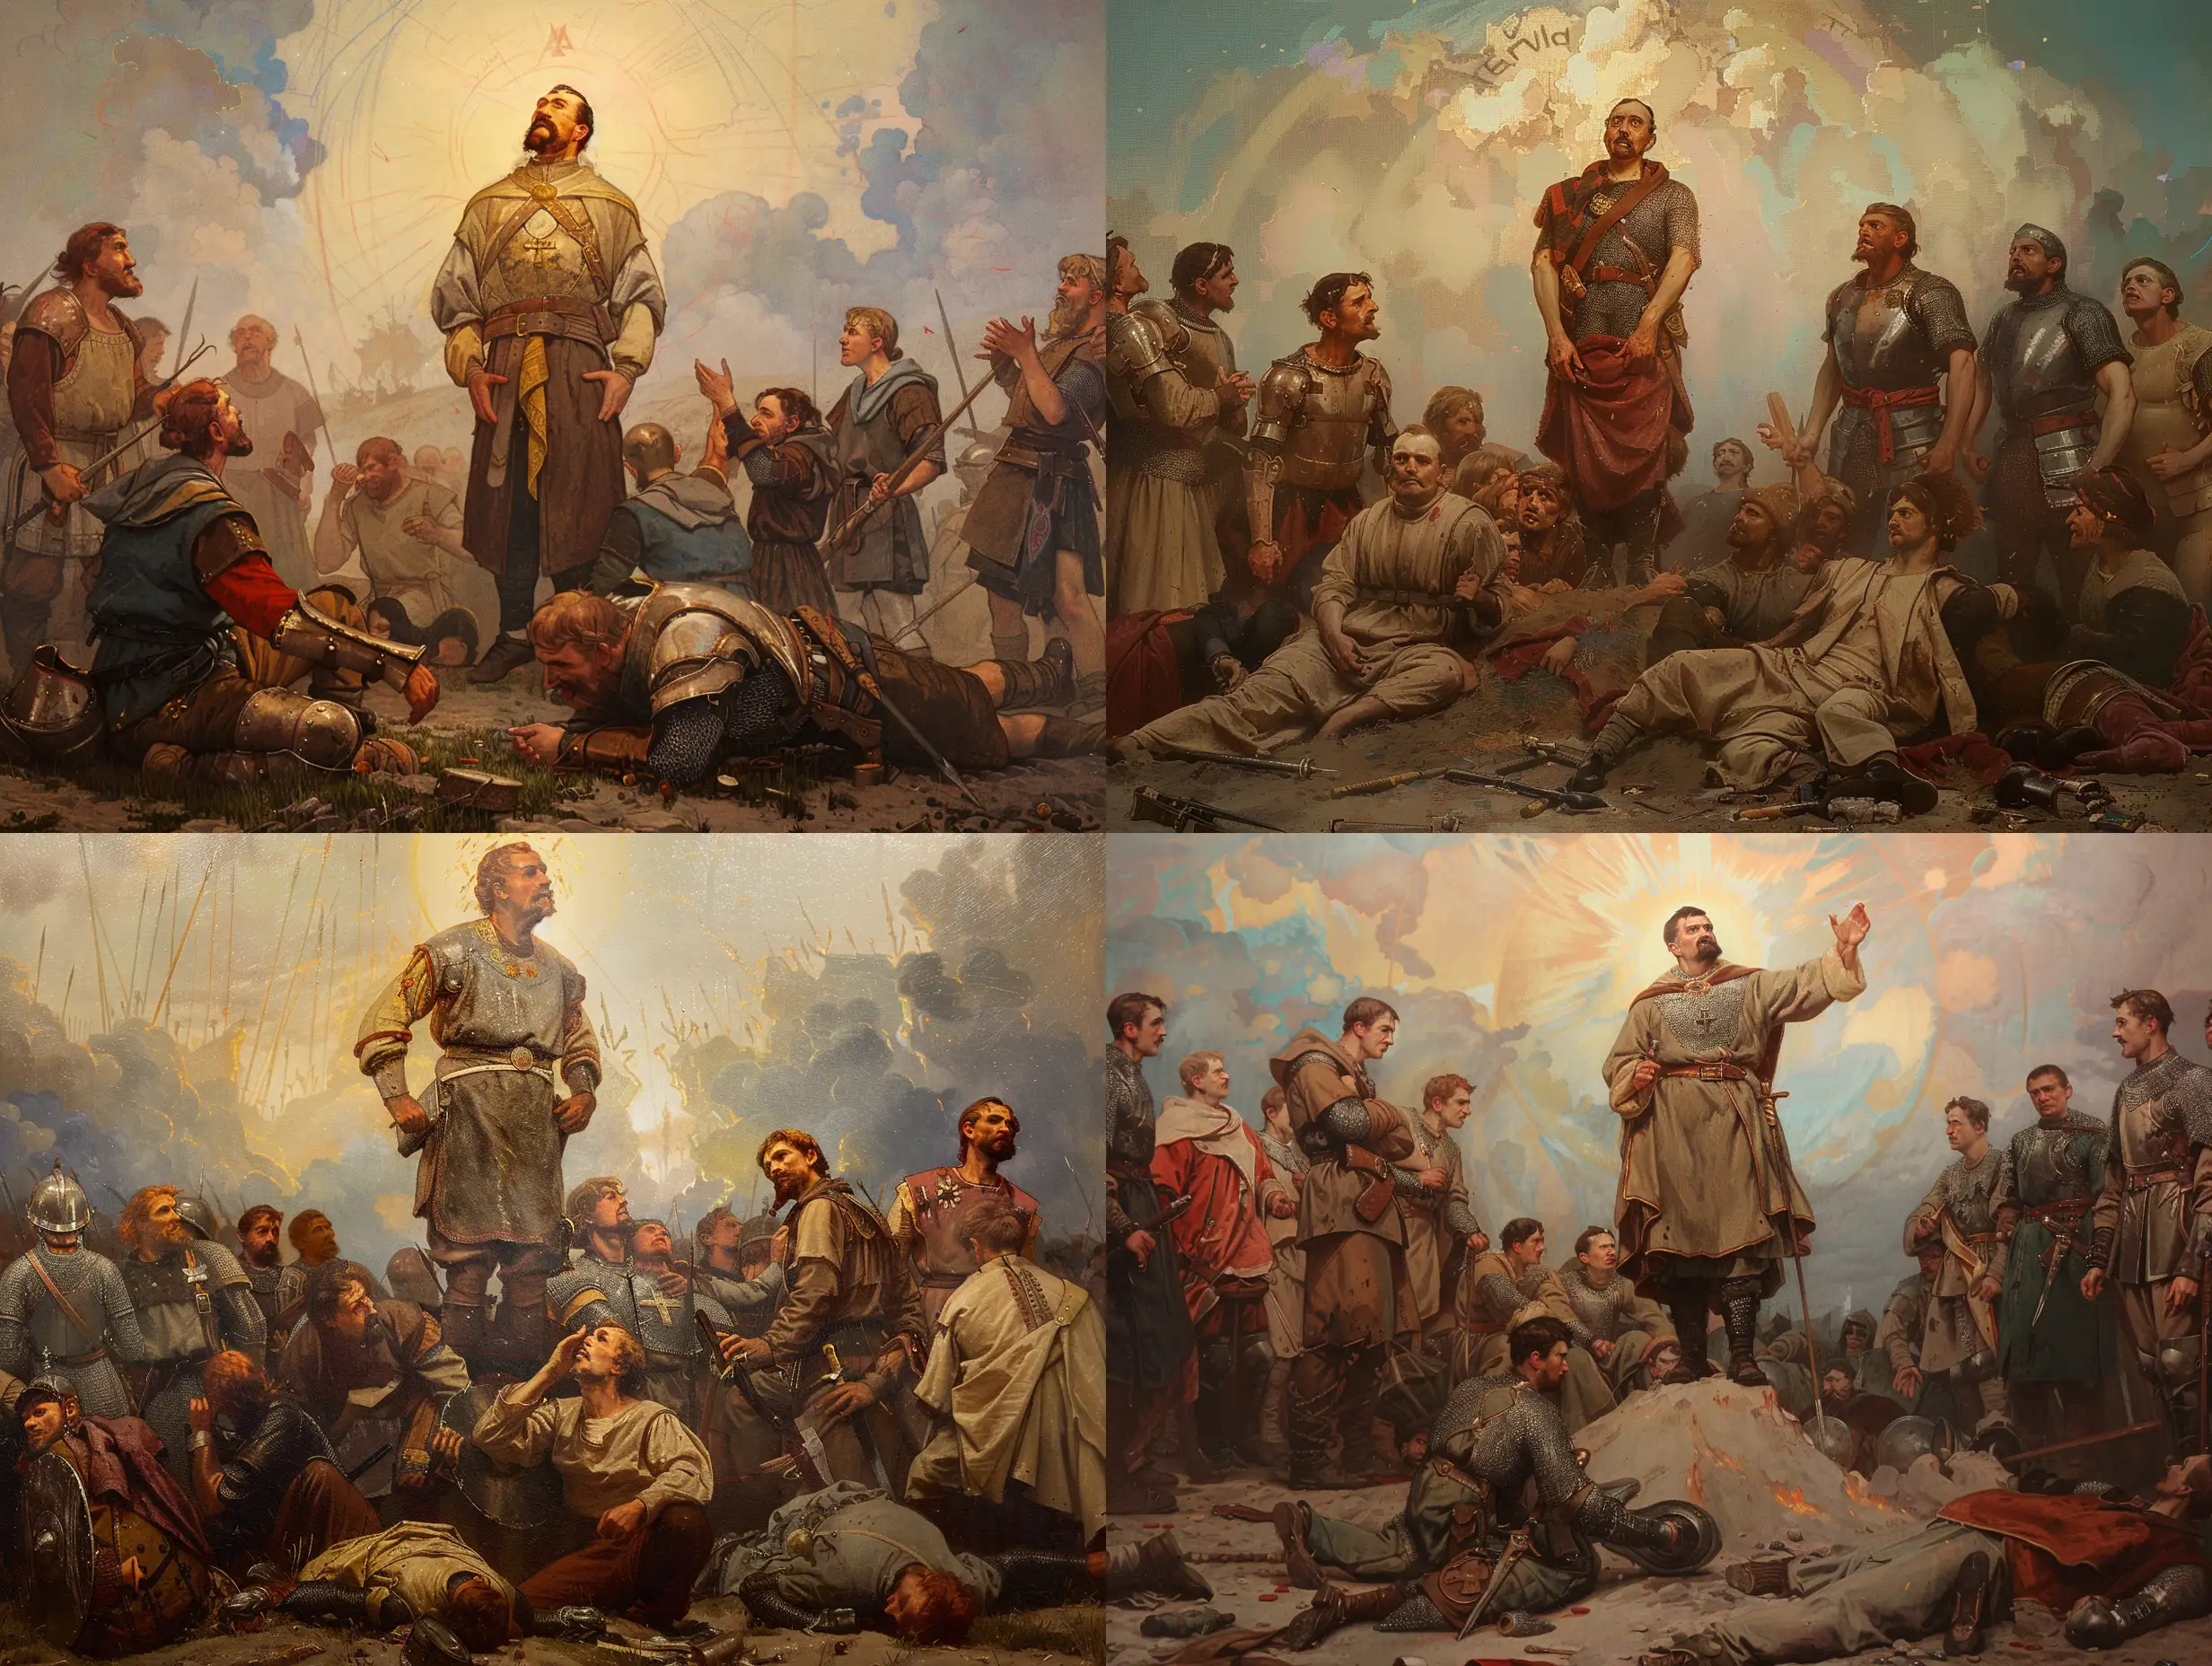 Historical-Painting-After-Battle-of-Grunwald-Inspired-by-Alfons-Muchas-Slavic-Epic-Series